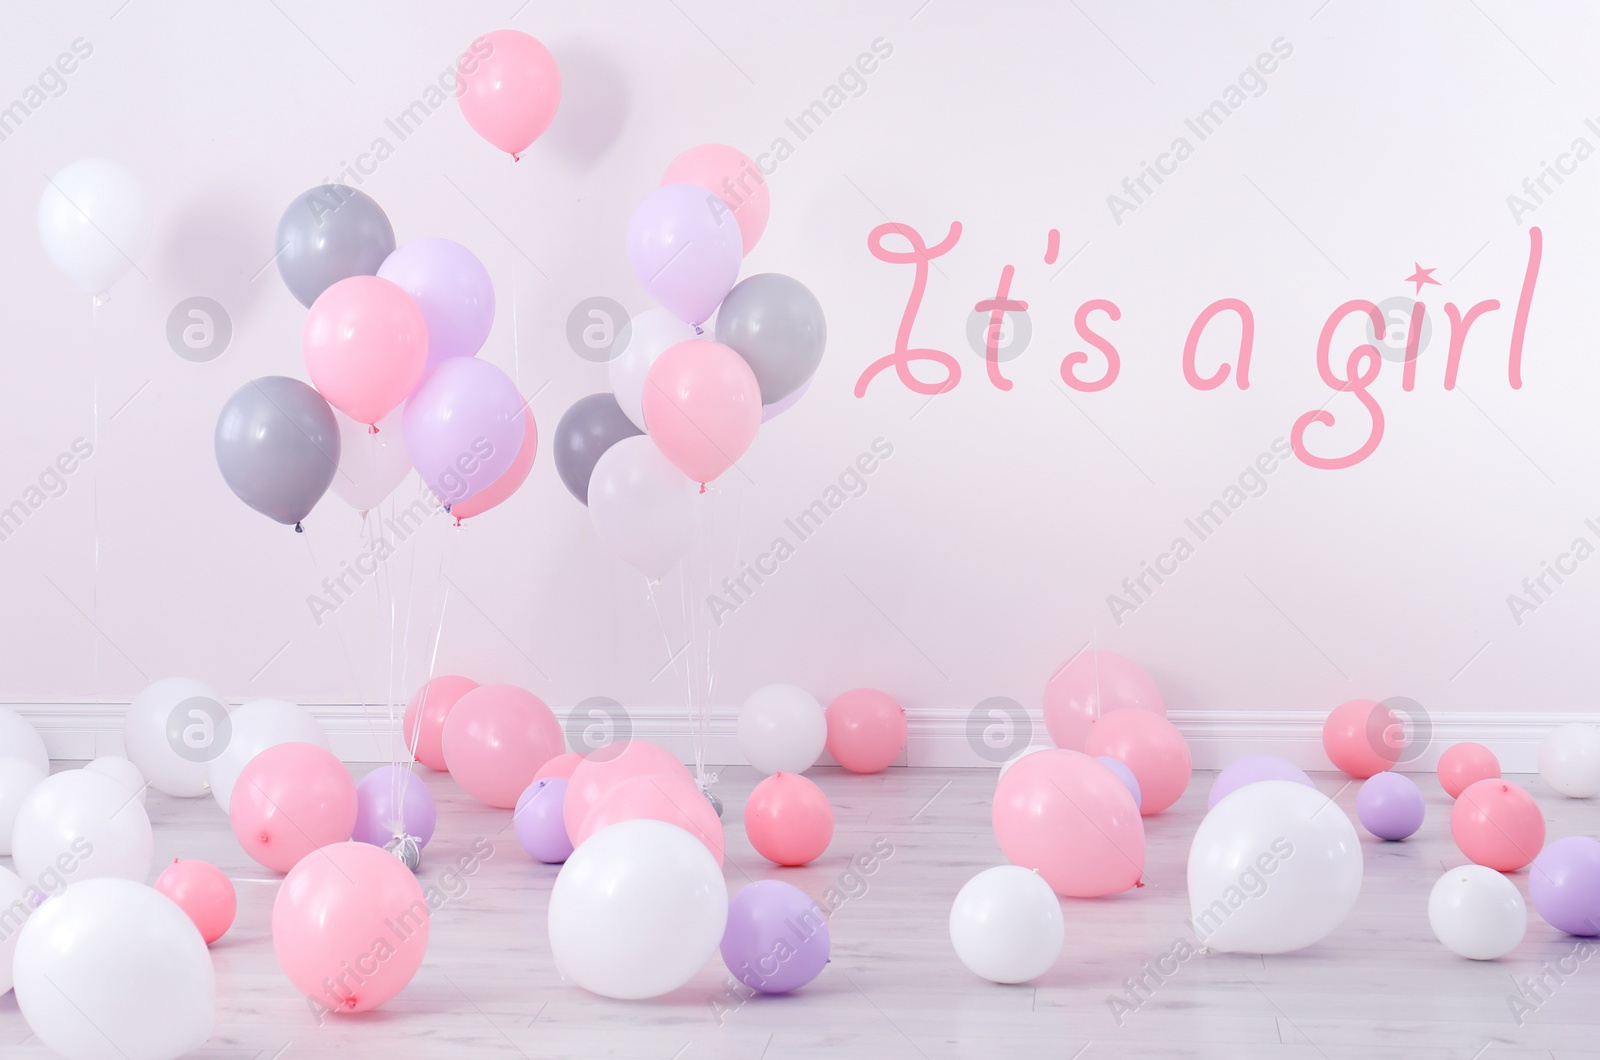 Image of Baby shower party for girl. Room decorated with balloons